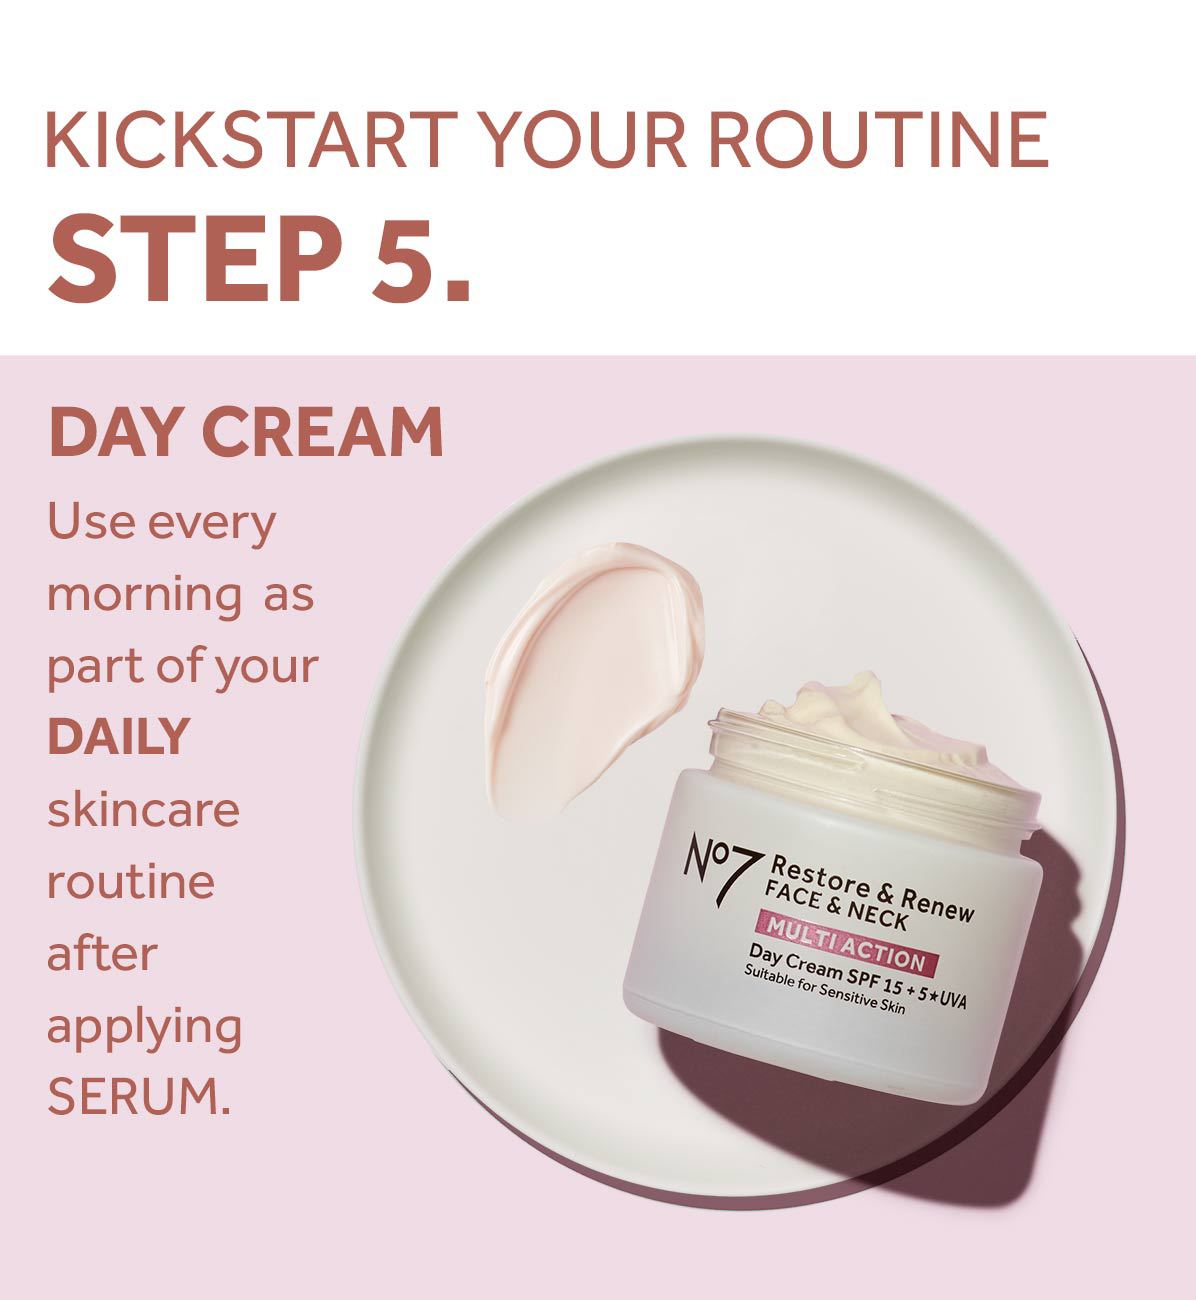 KICKSTART YOUR ROUTINESTEP 5.DAY CREAMUse every morning as part of yourDAILYskincare routine after applyingSERUM.